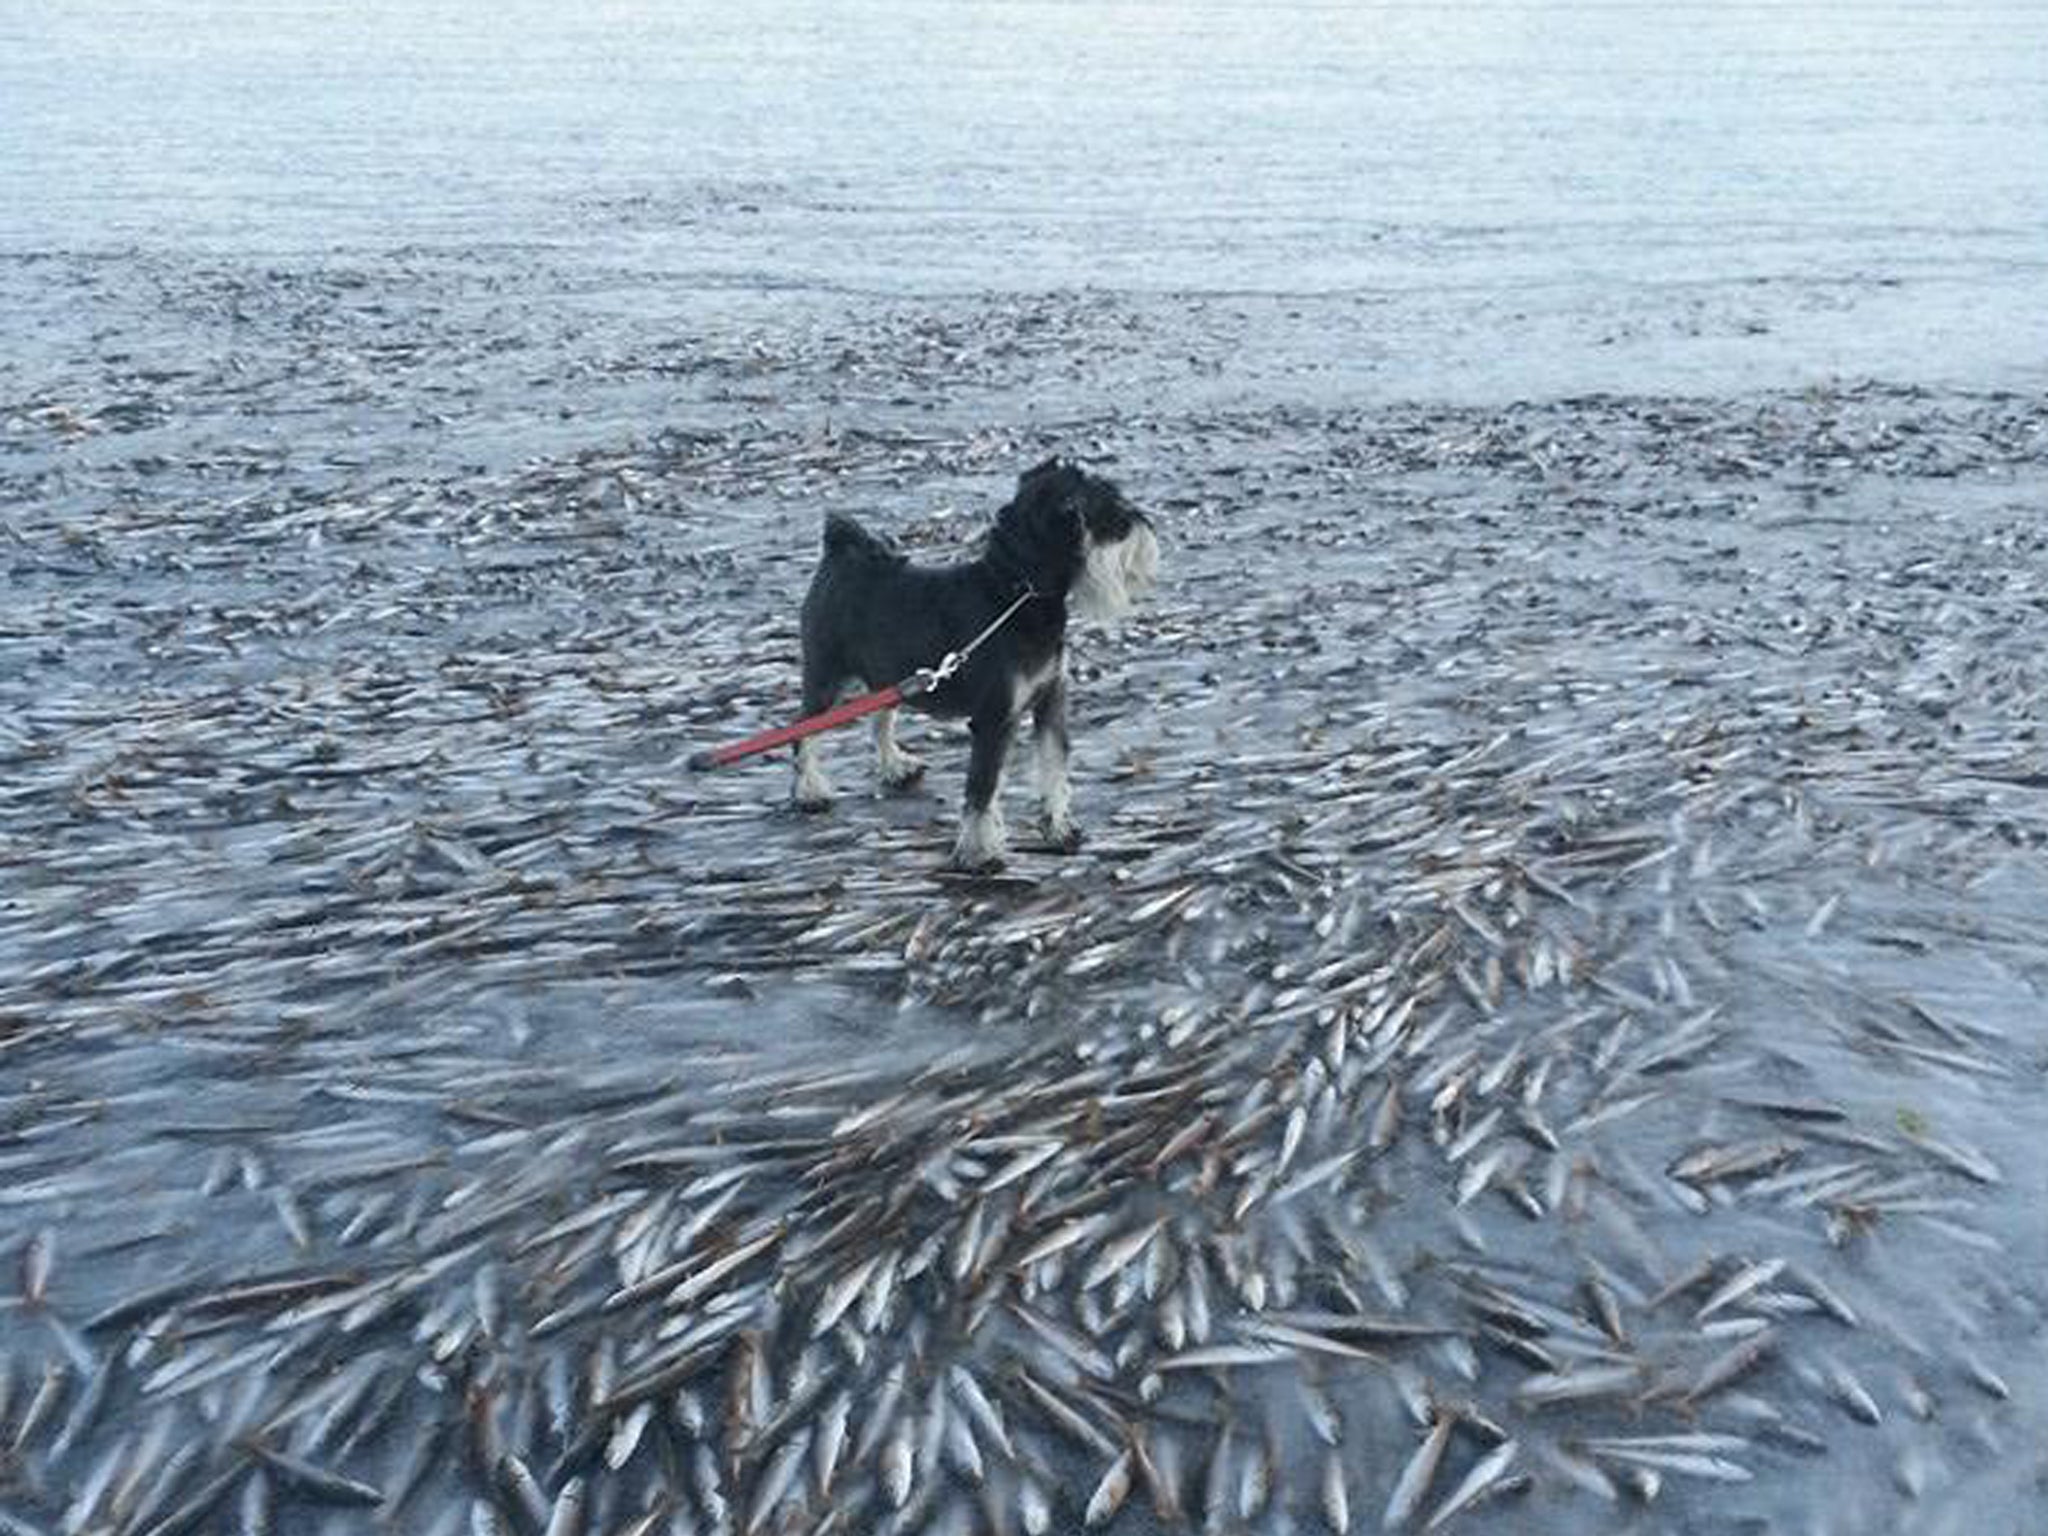 The huge shoal of herring were swimming too close to the surface when the water suddenly froze around them, completely stopping them in their tracks and creating the incredible sight. 